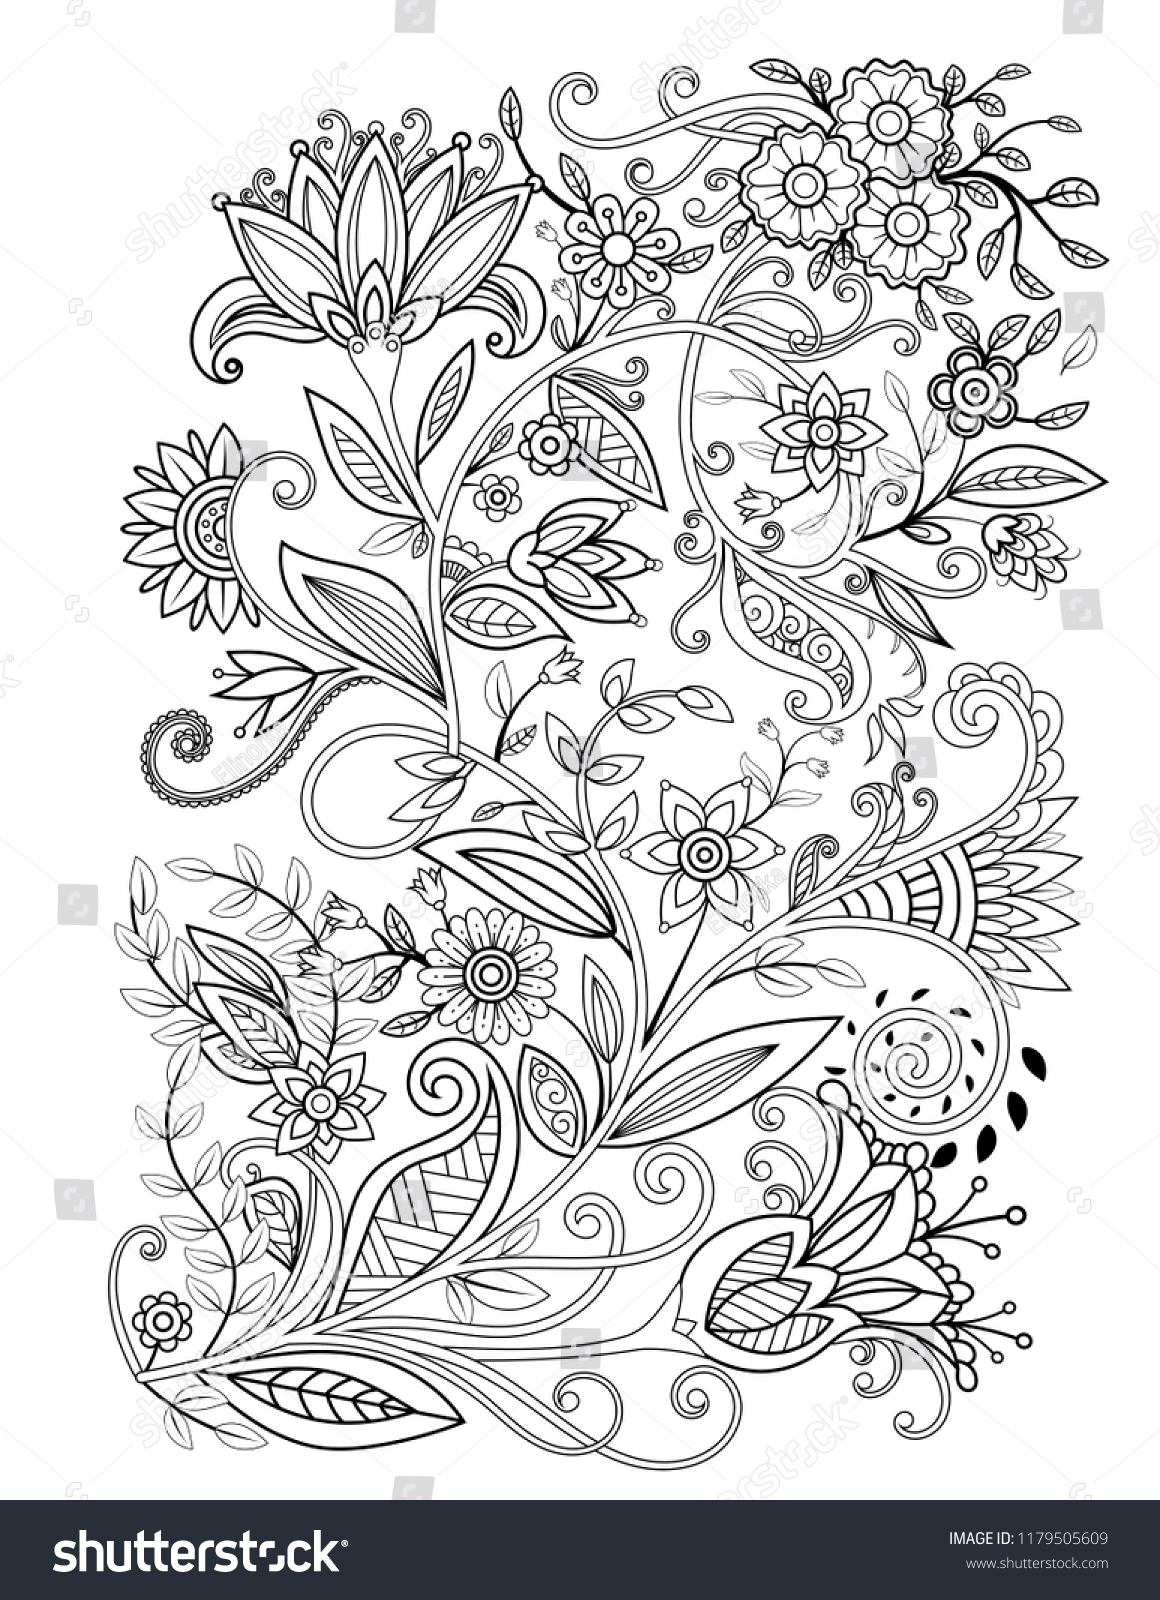 Floral Adult Coloring Page Black White Stock Vector (Royalty Free ...